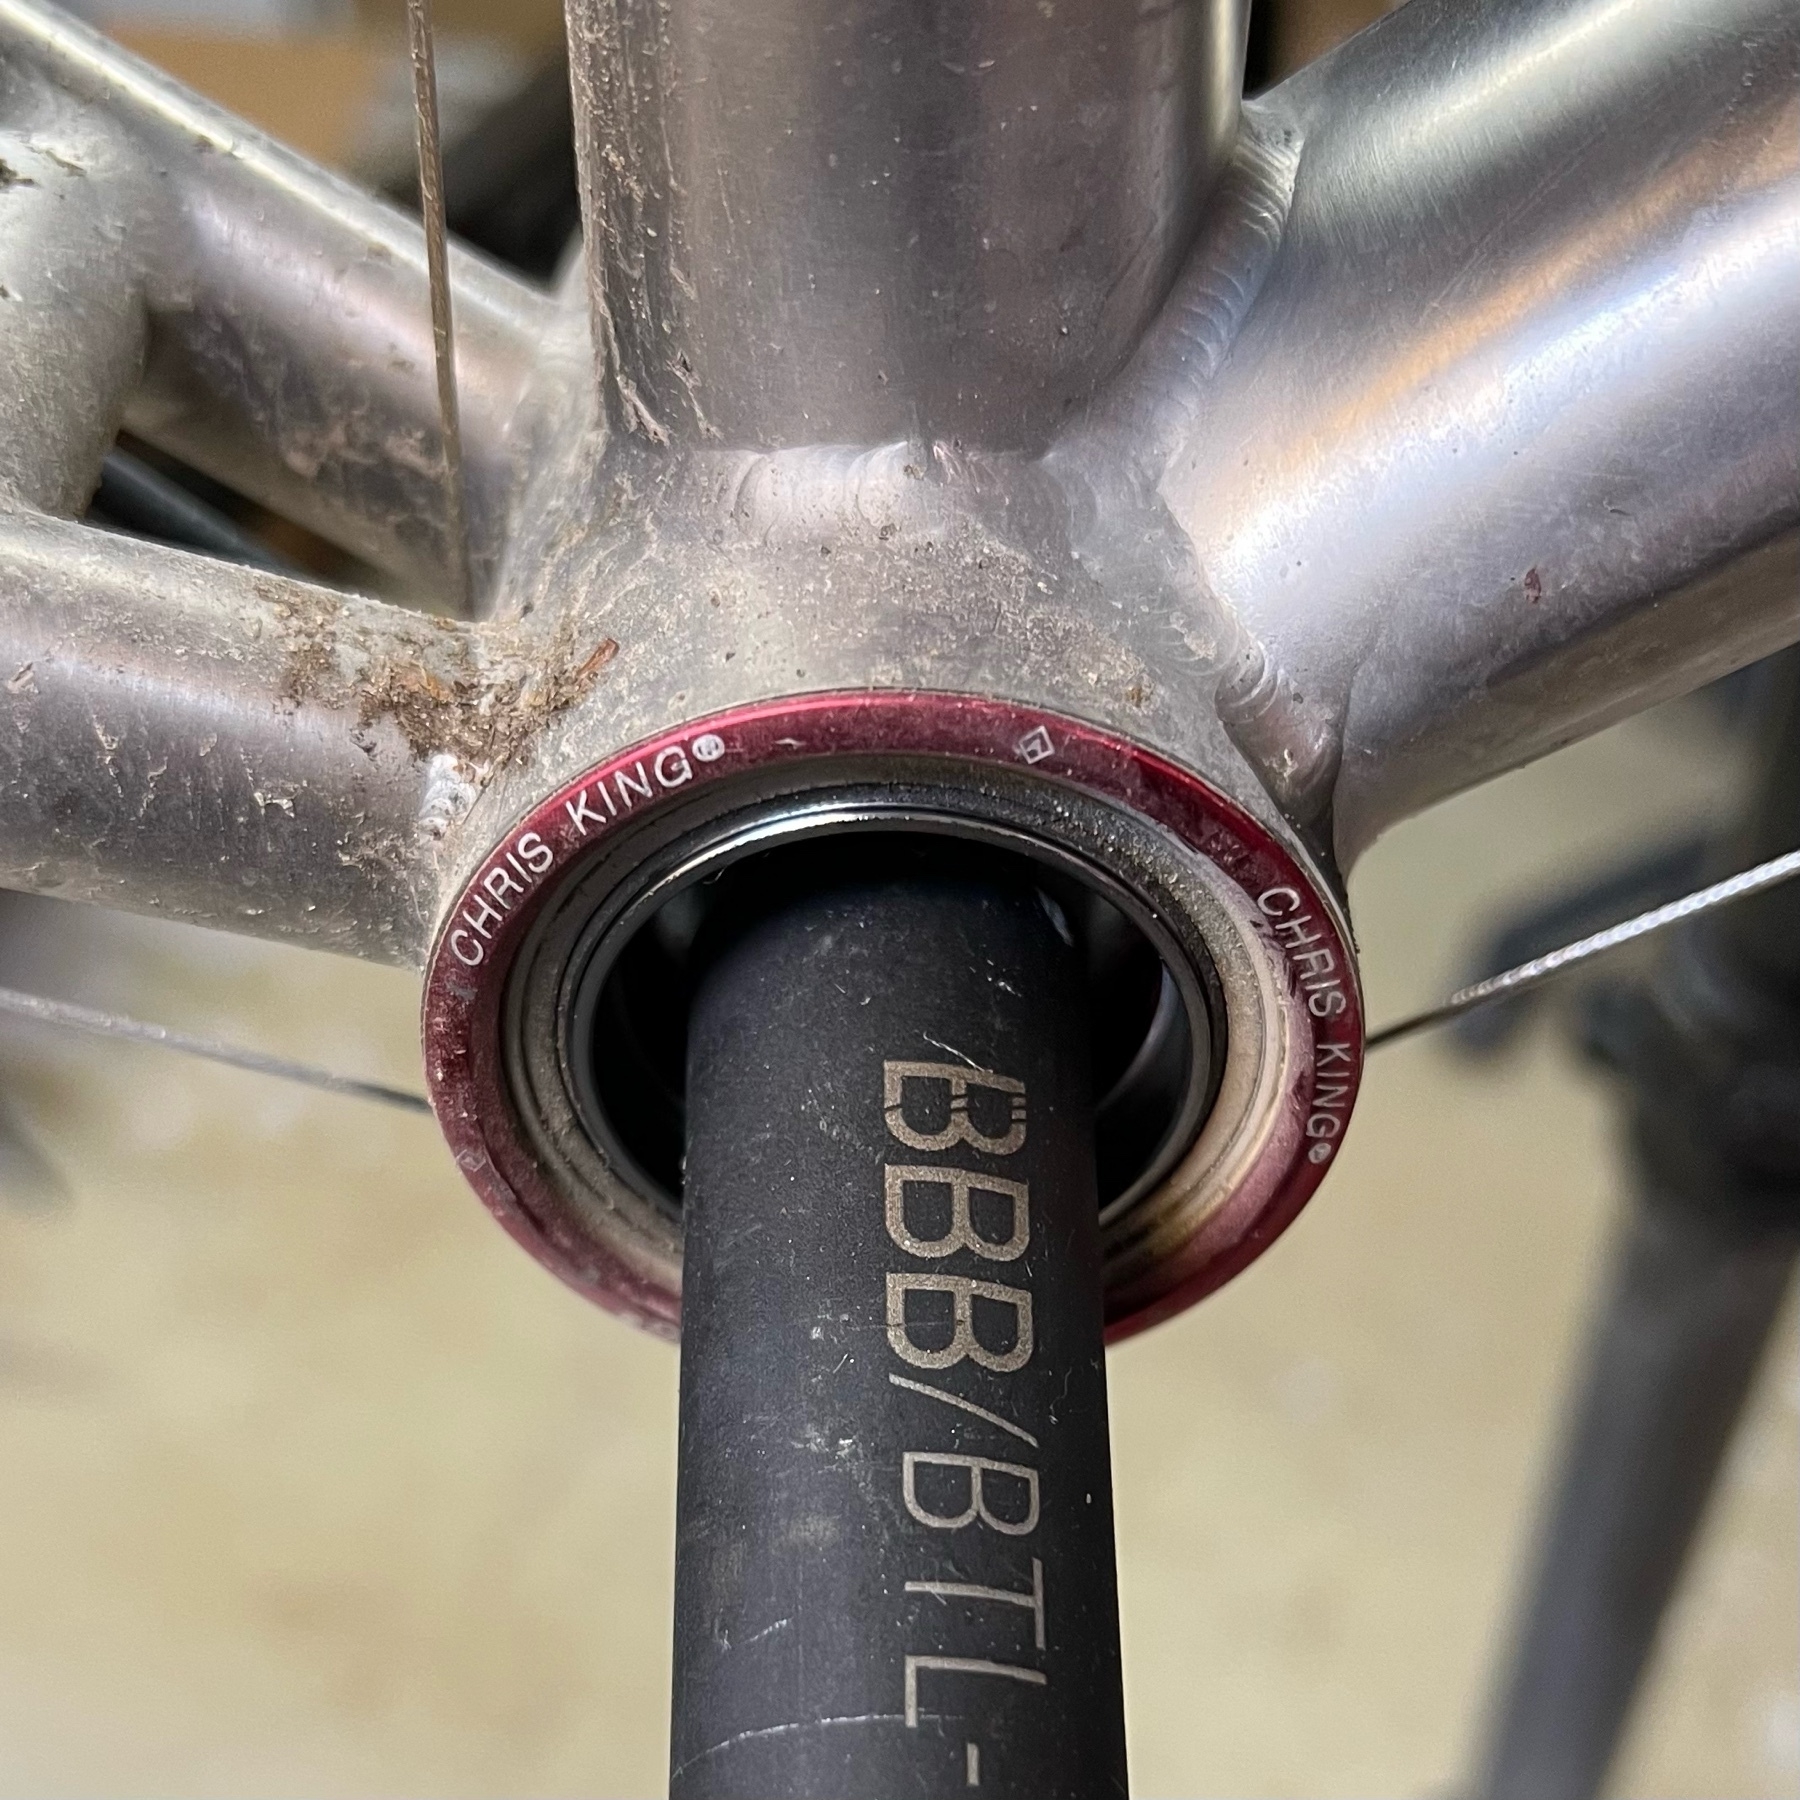 Red-anodised Chris King Pressfit 30 bottom bracket in a titanium bicycle frame. An extraction tool hanging in the bottom bracket. The frame around the bottom bracket is slightly sandy.